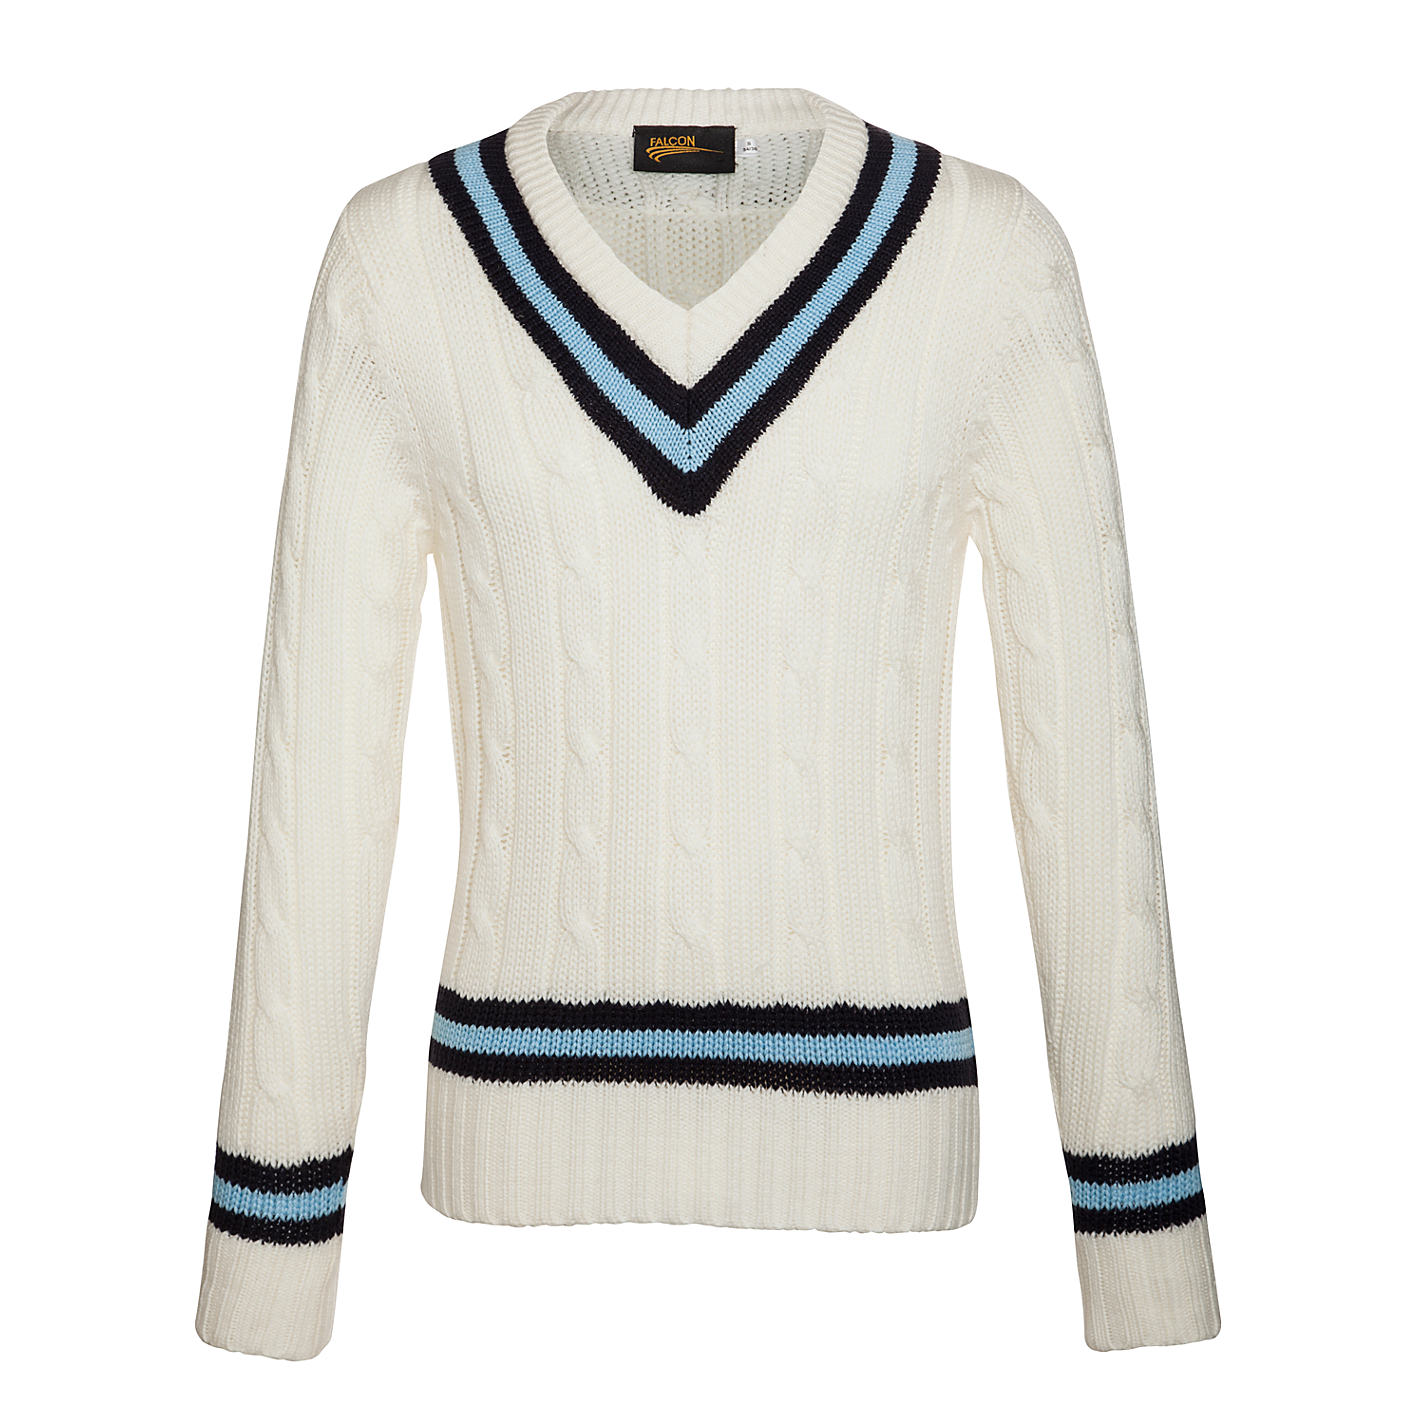 Buy Cricket sweater Full Sleeve -L Online @ ₹899 from ShopClues